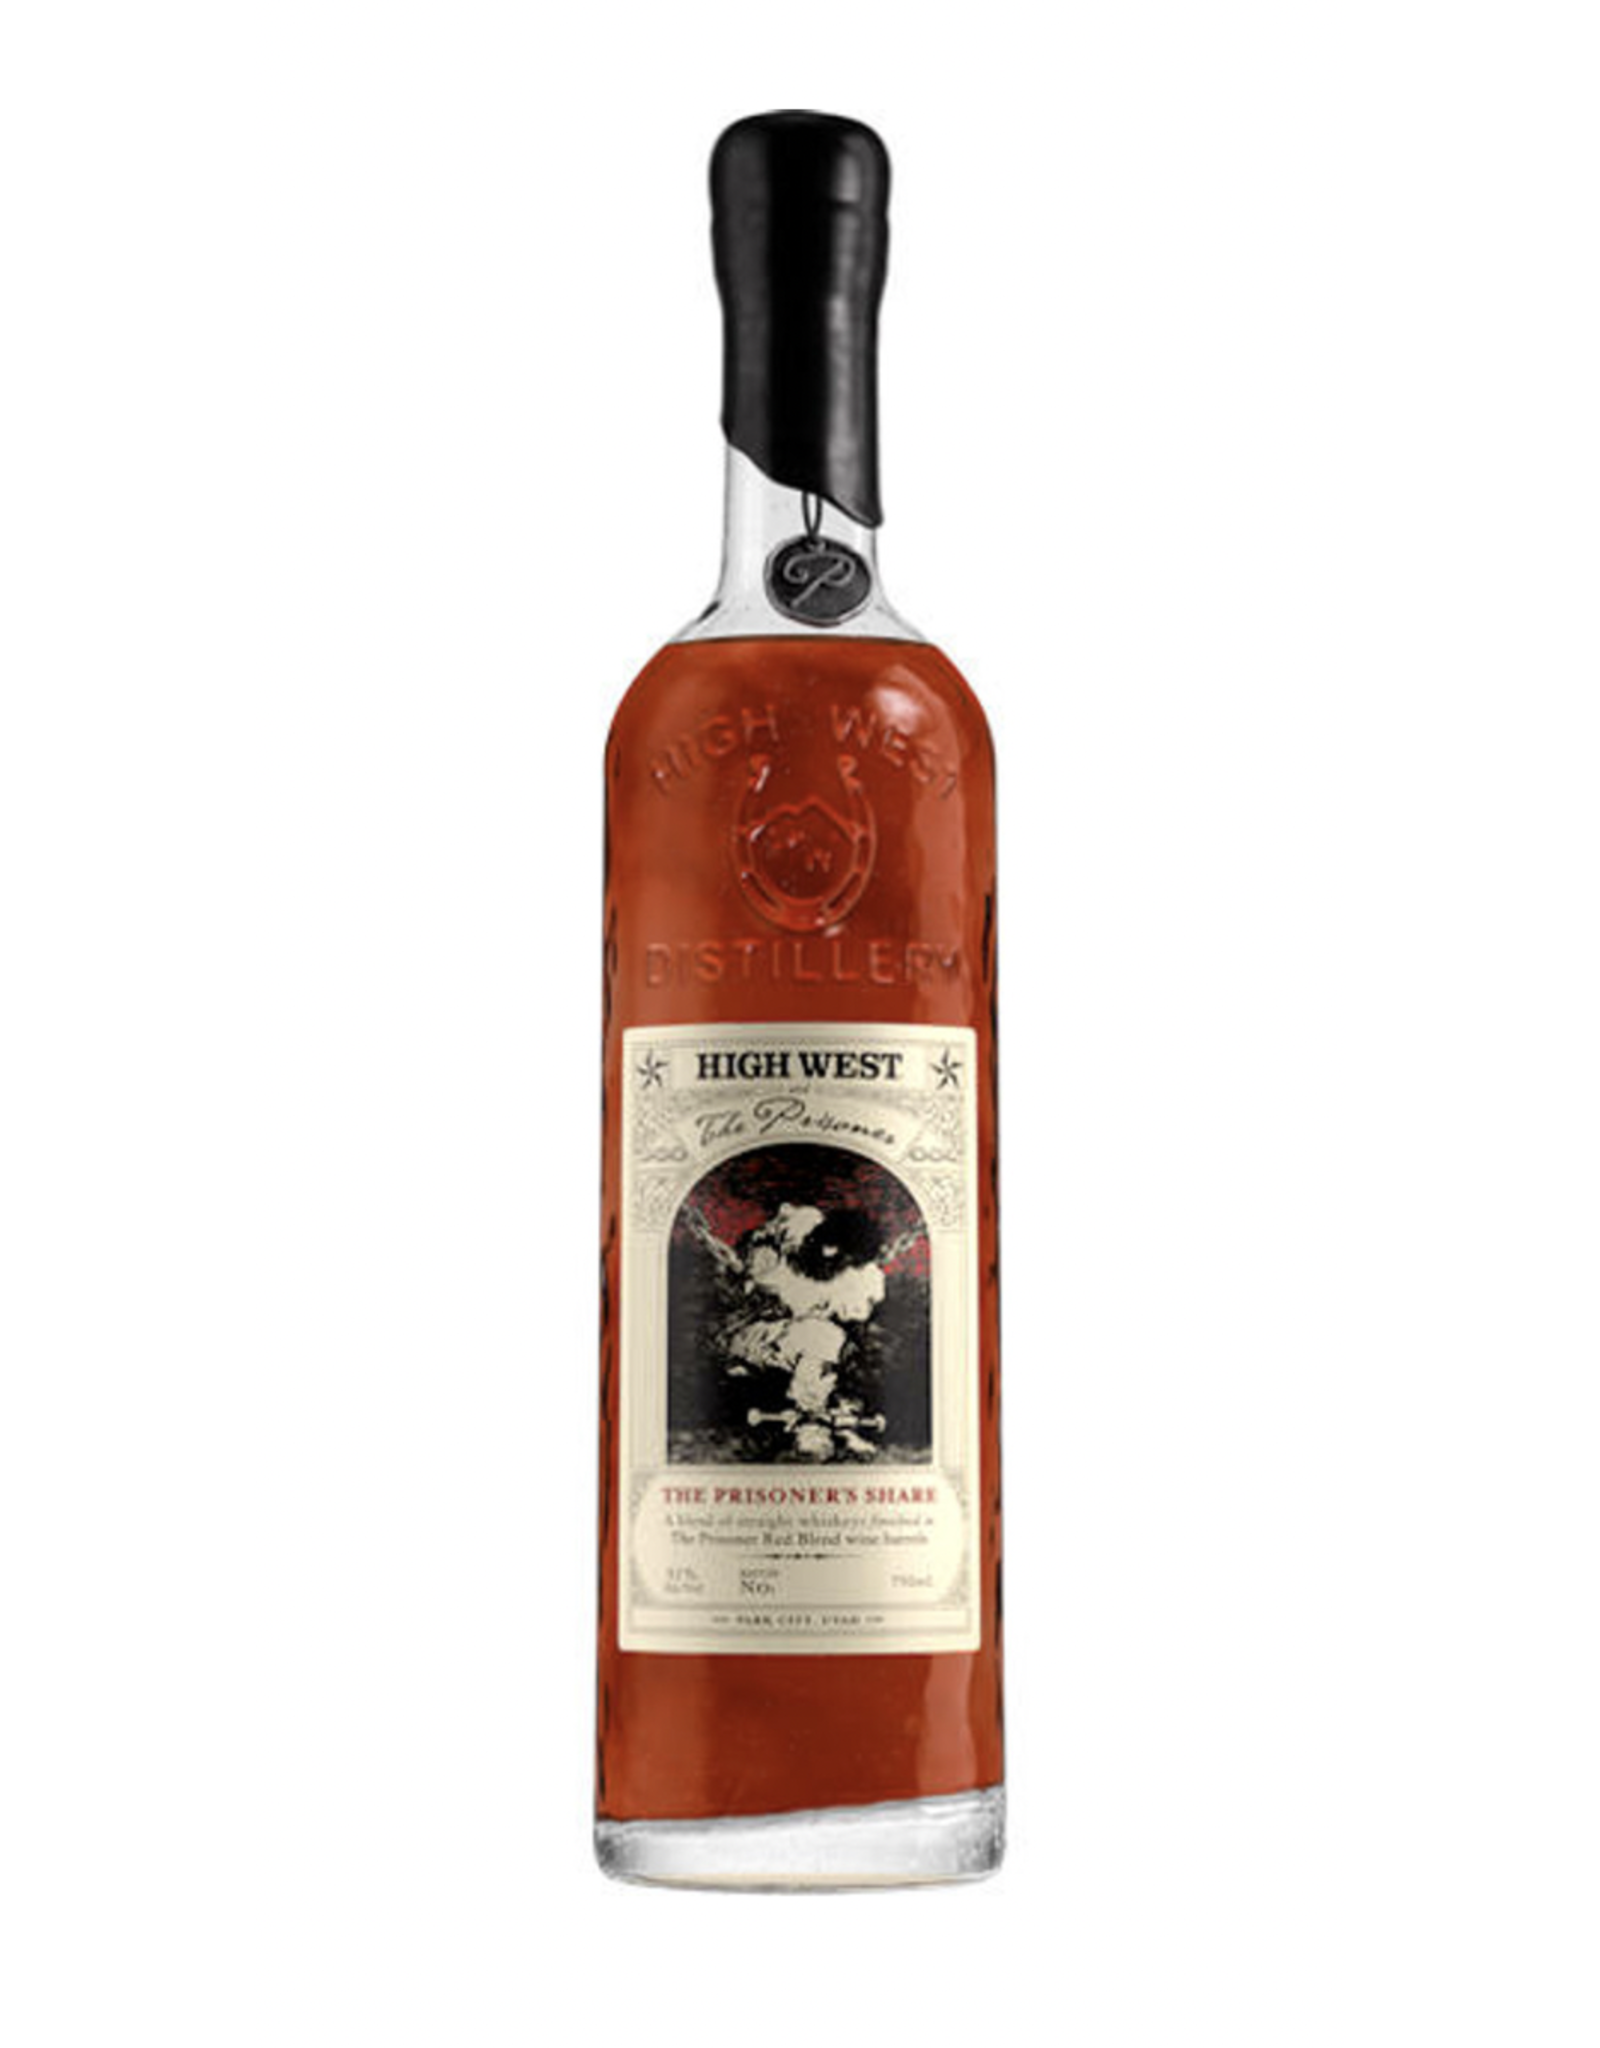 High West The Prisoner's Share  National Limited Release Edition